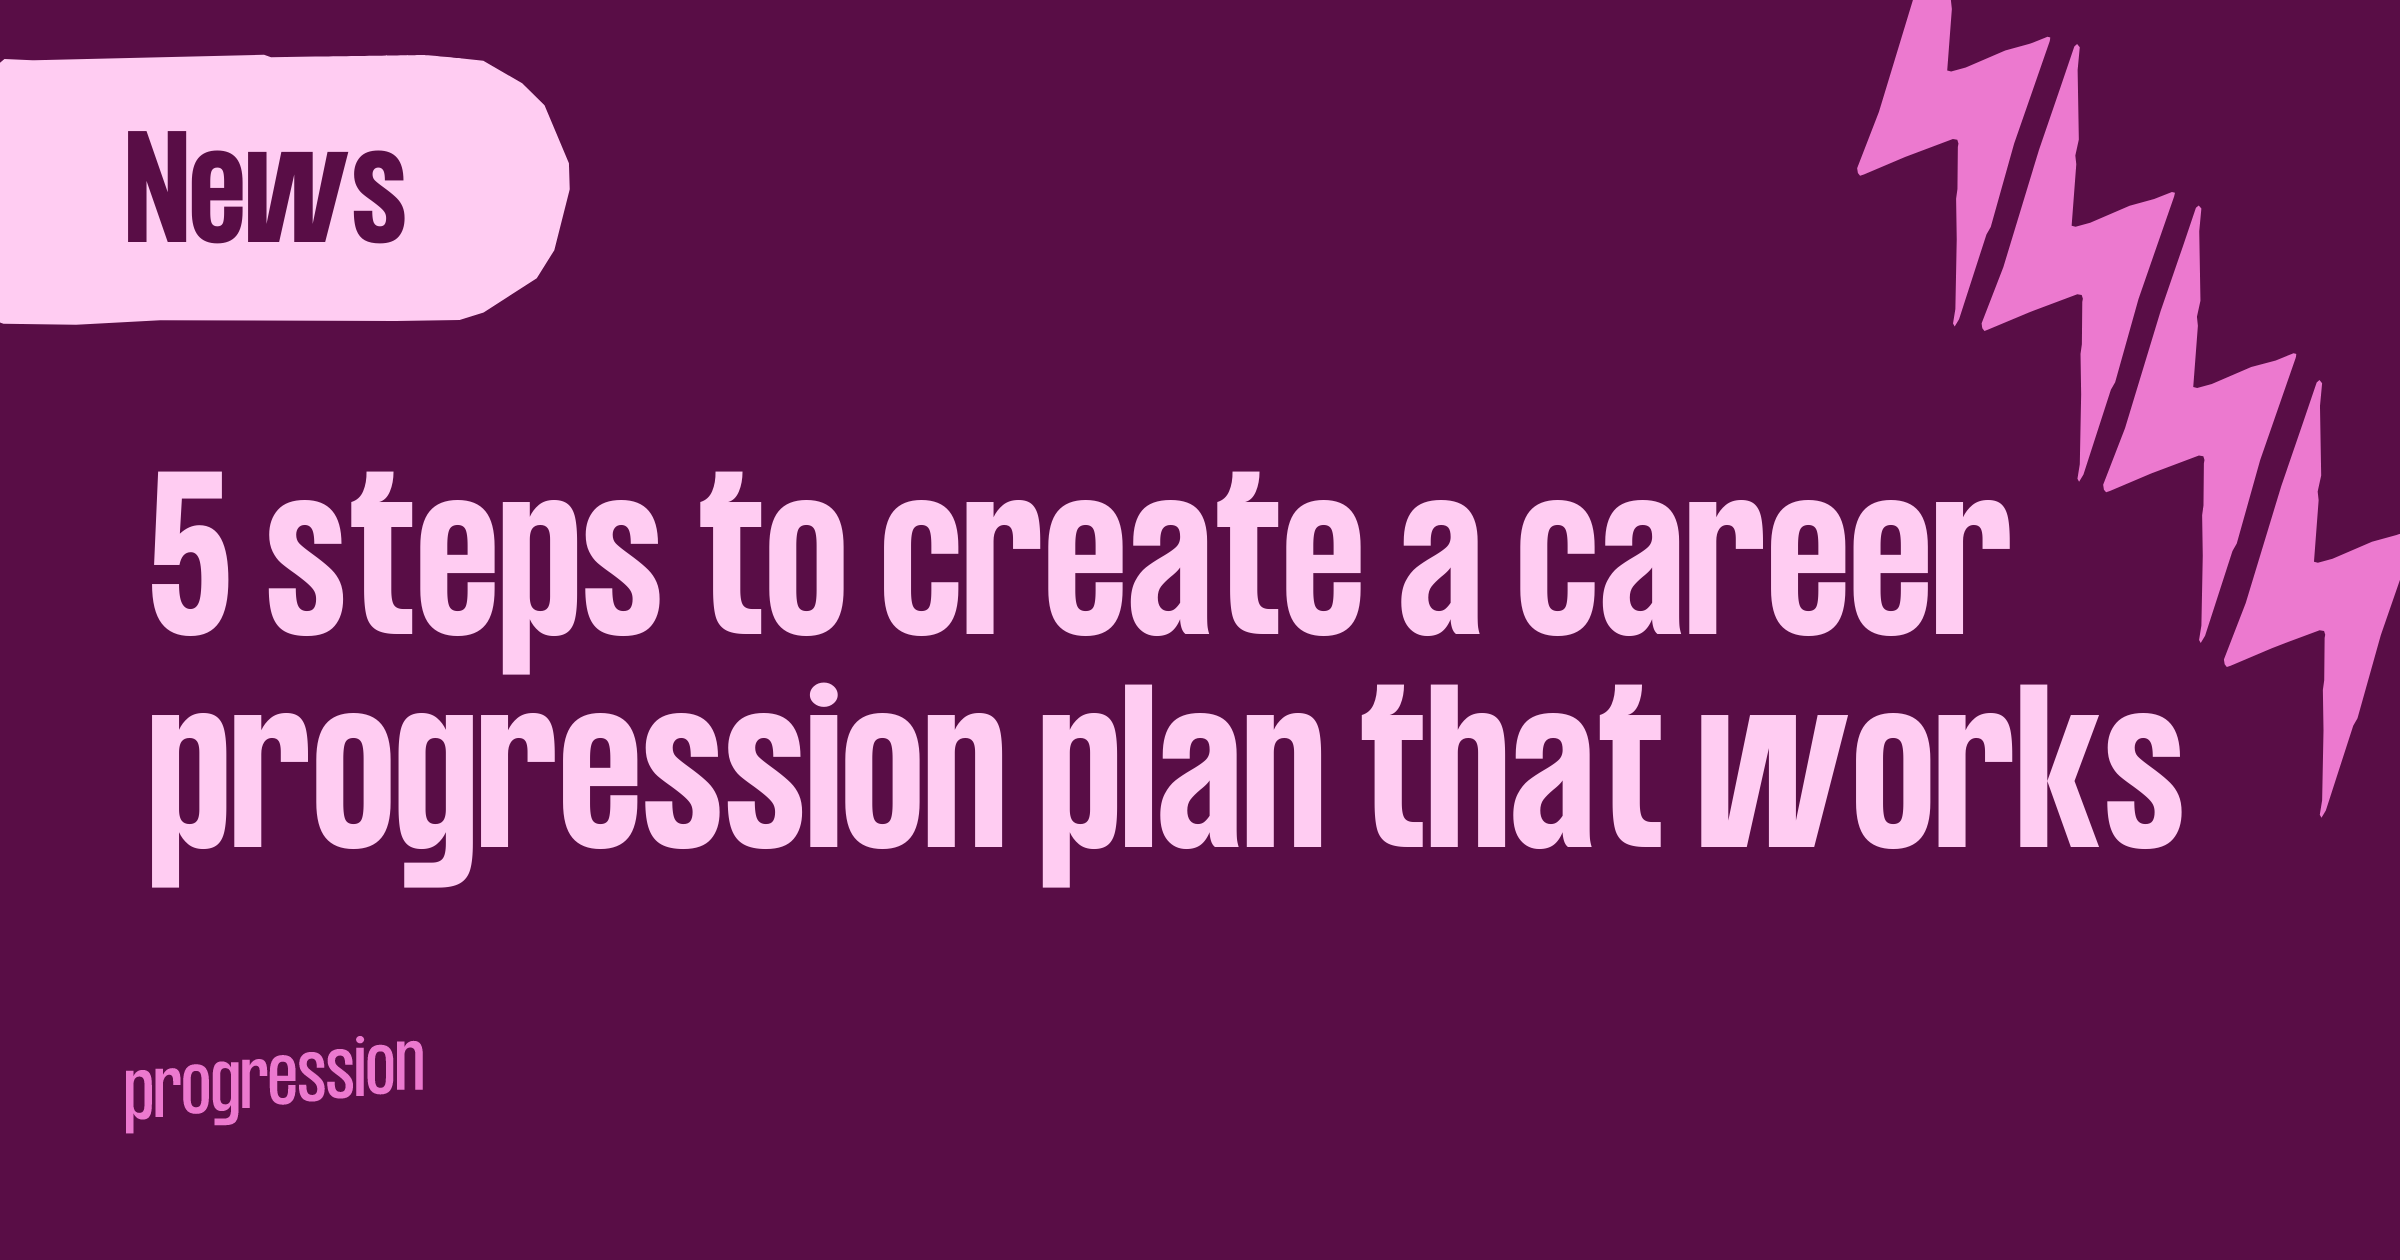 5 steps to create a career progression plan that works